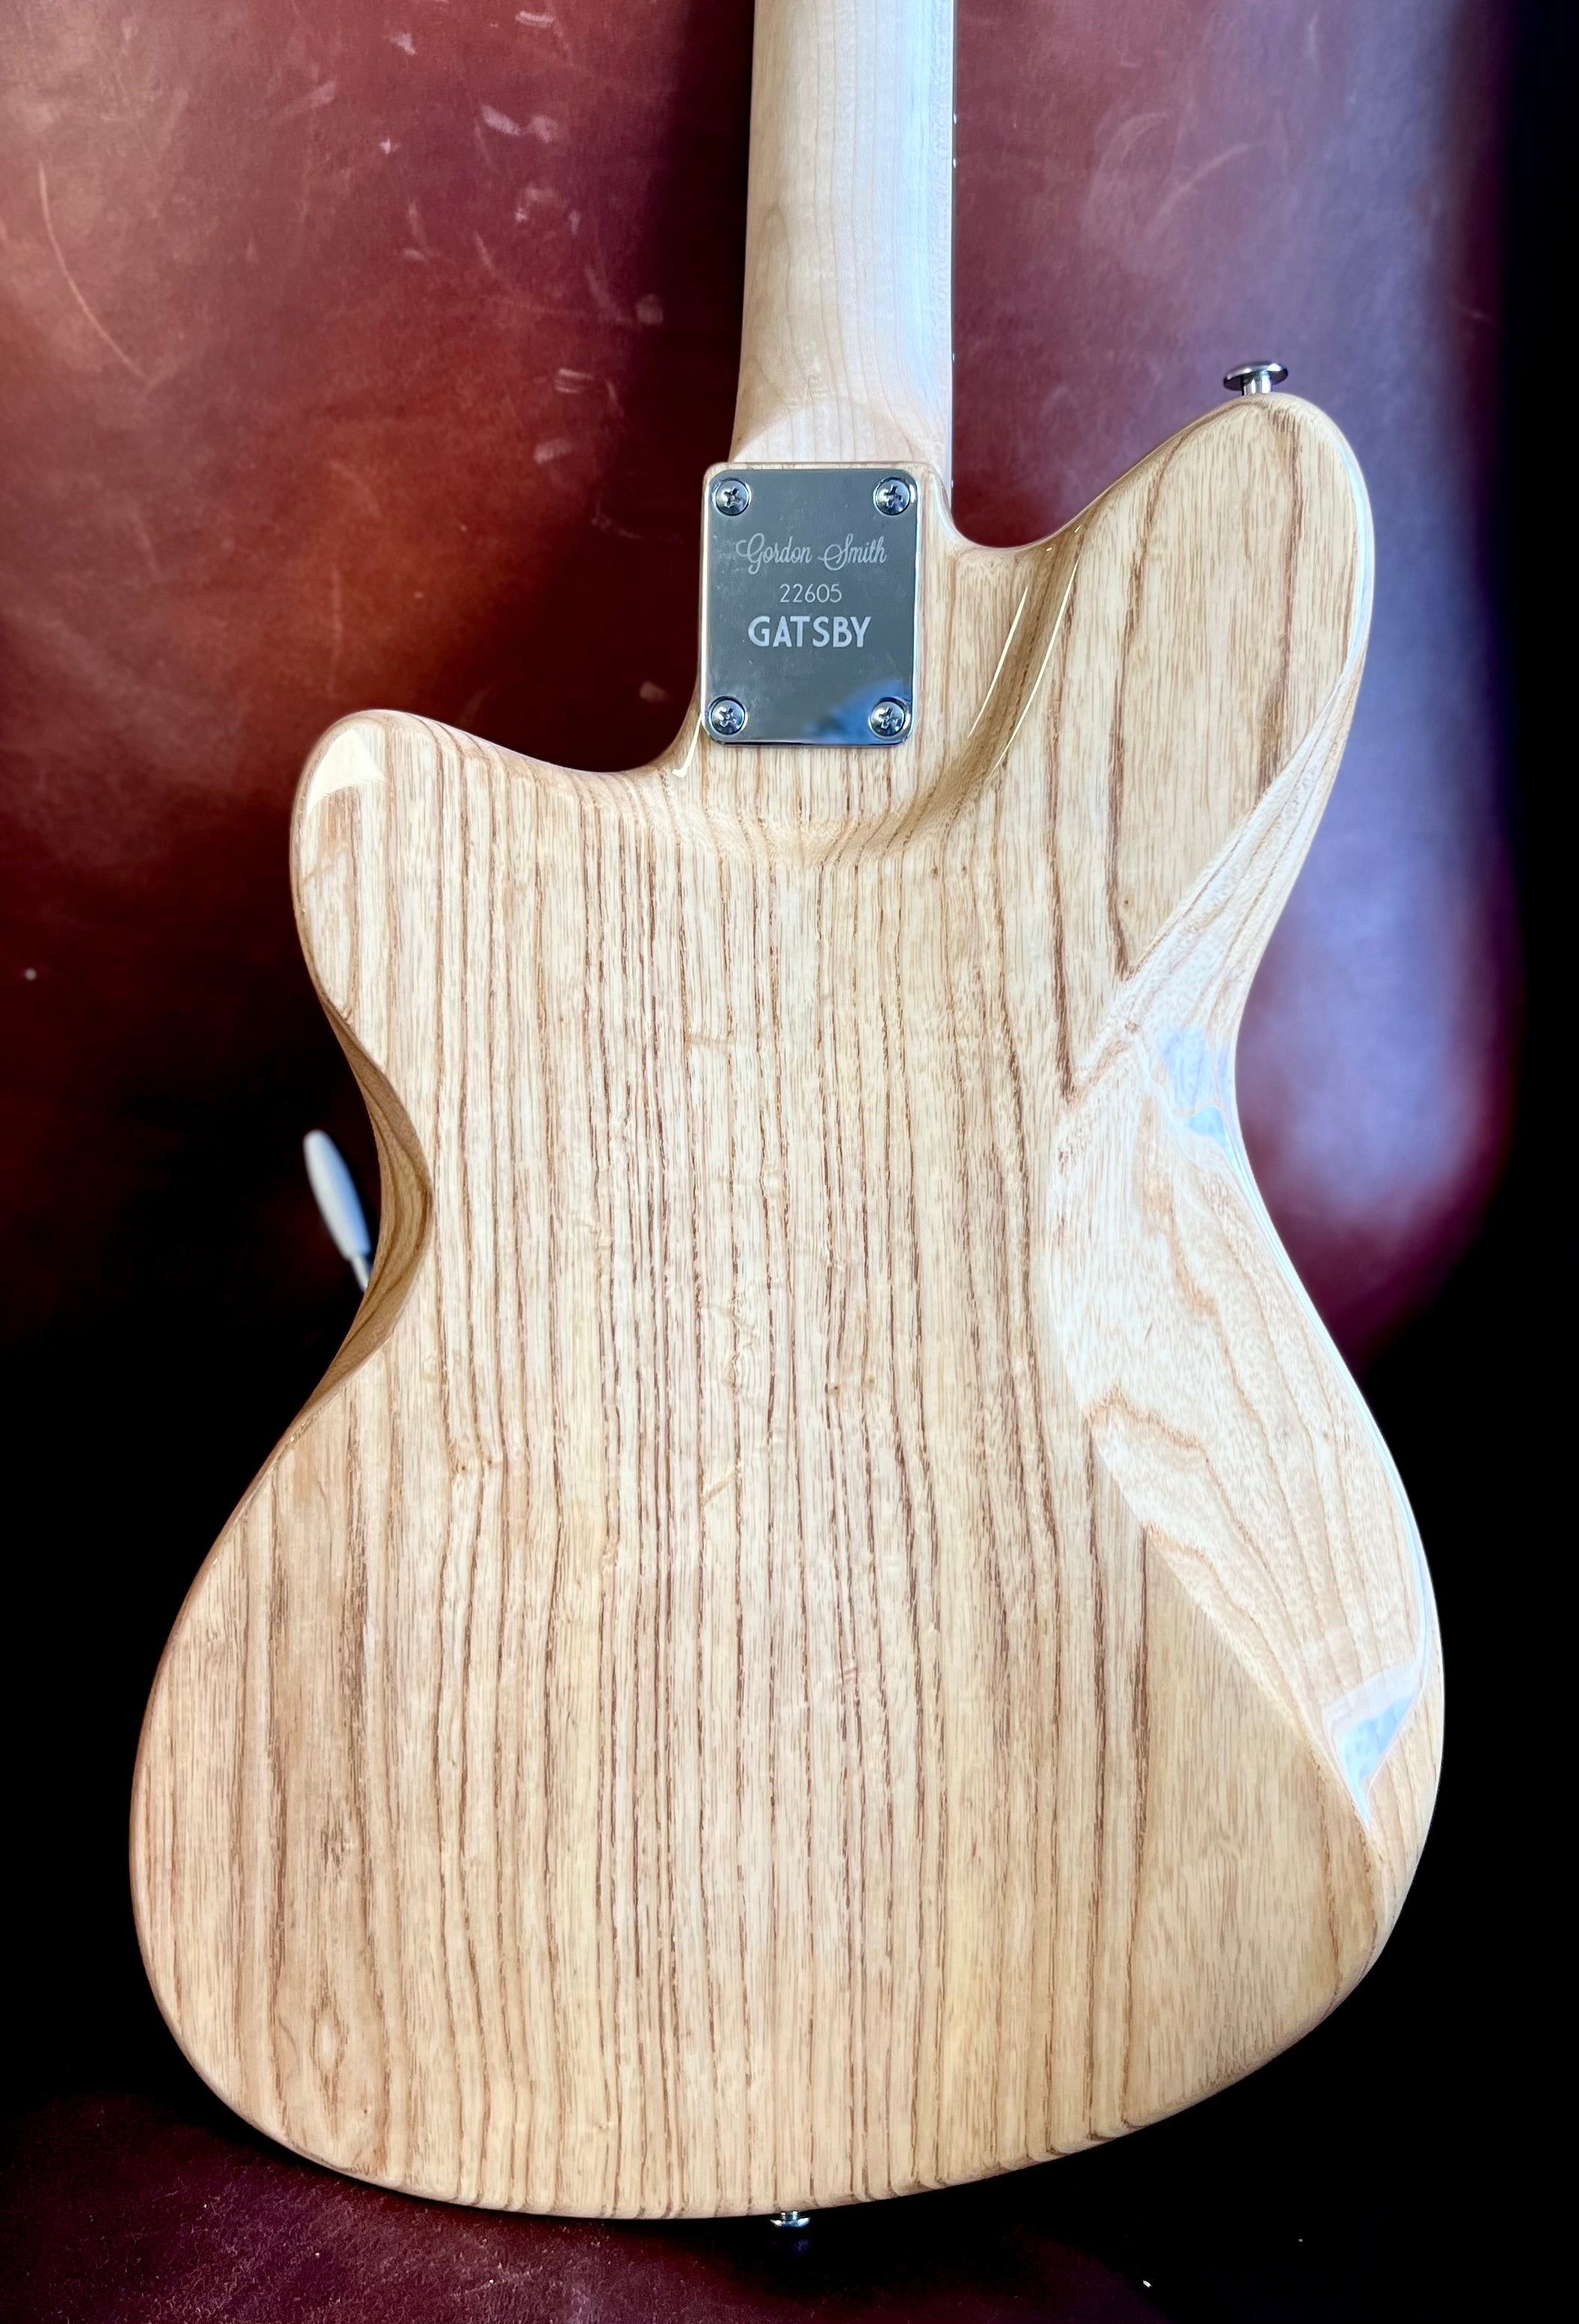 Gordon Smith Gatsby-S Natural Swamp Ash, Electric Guitar for sale at Richards Guitars.